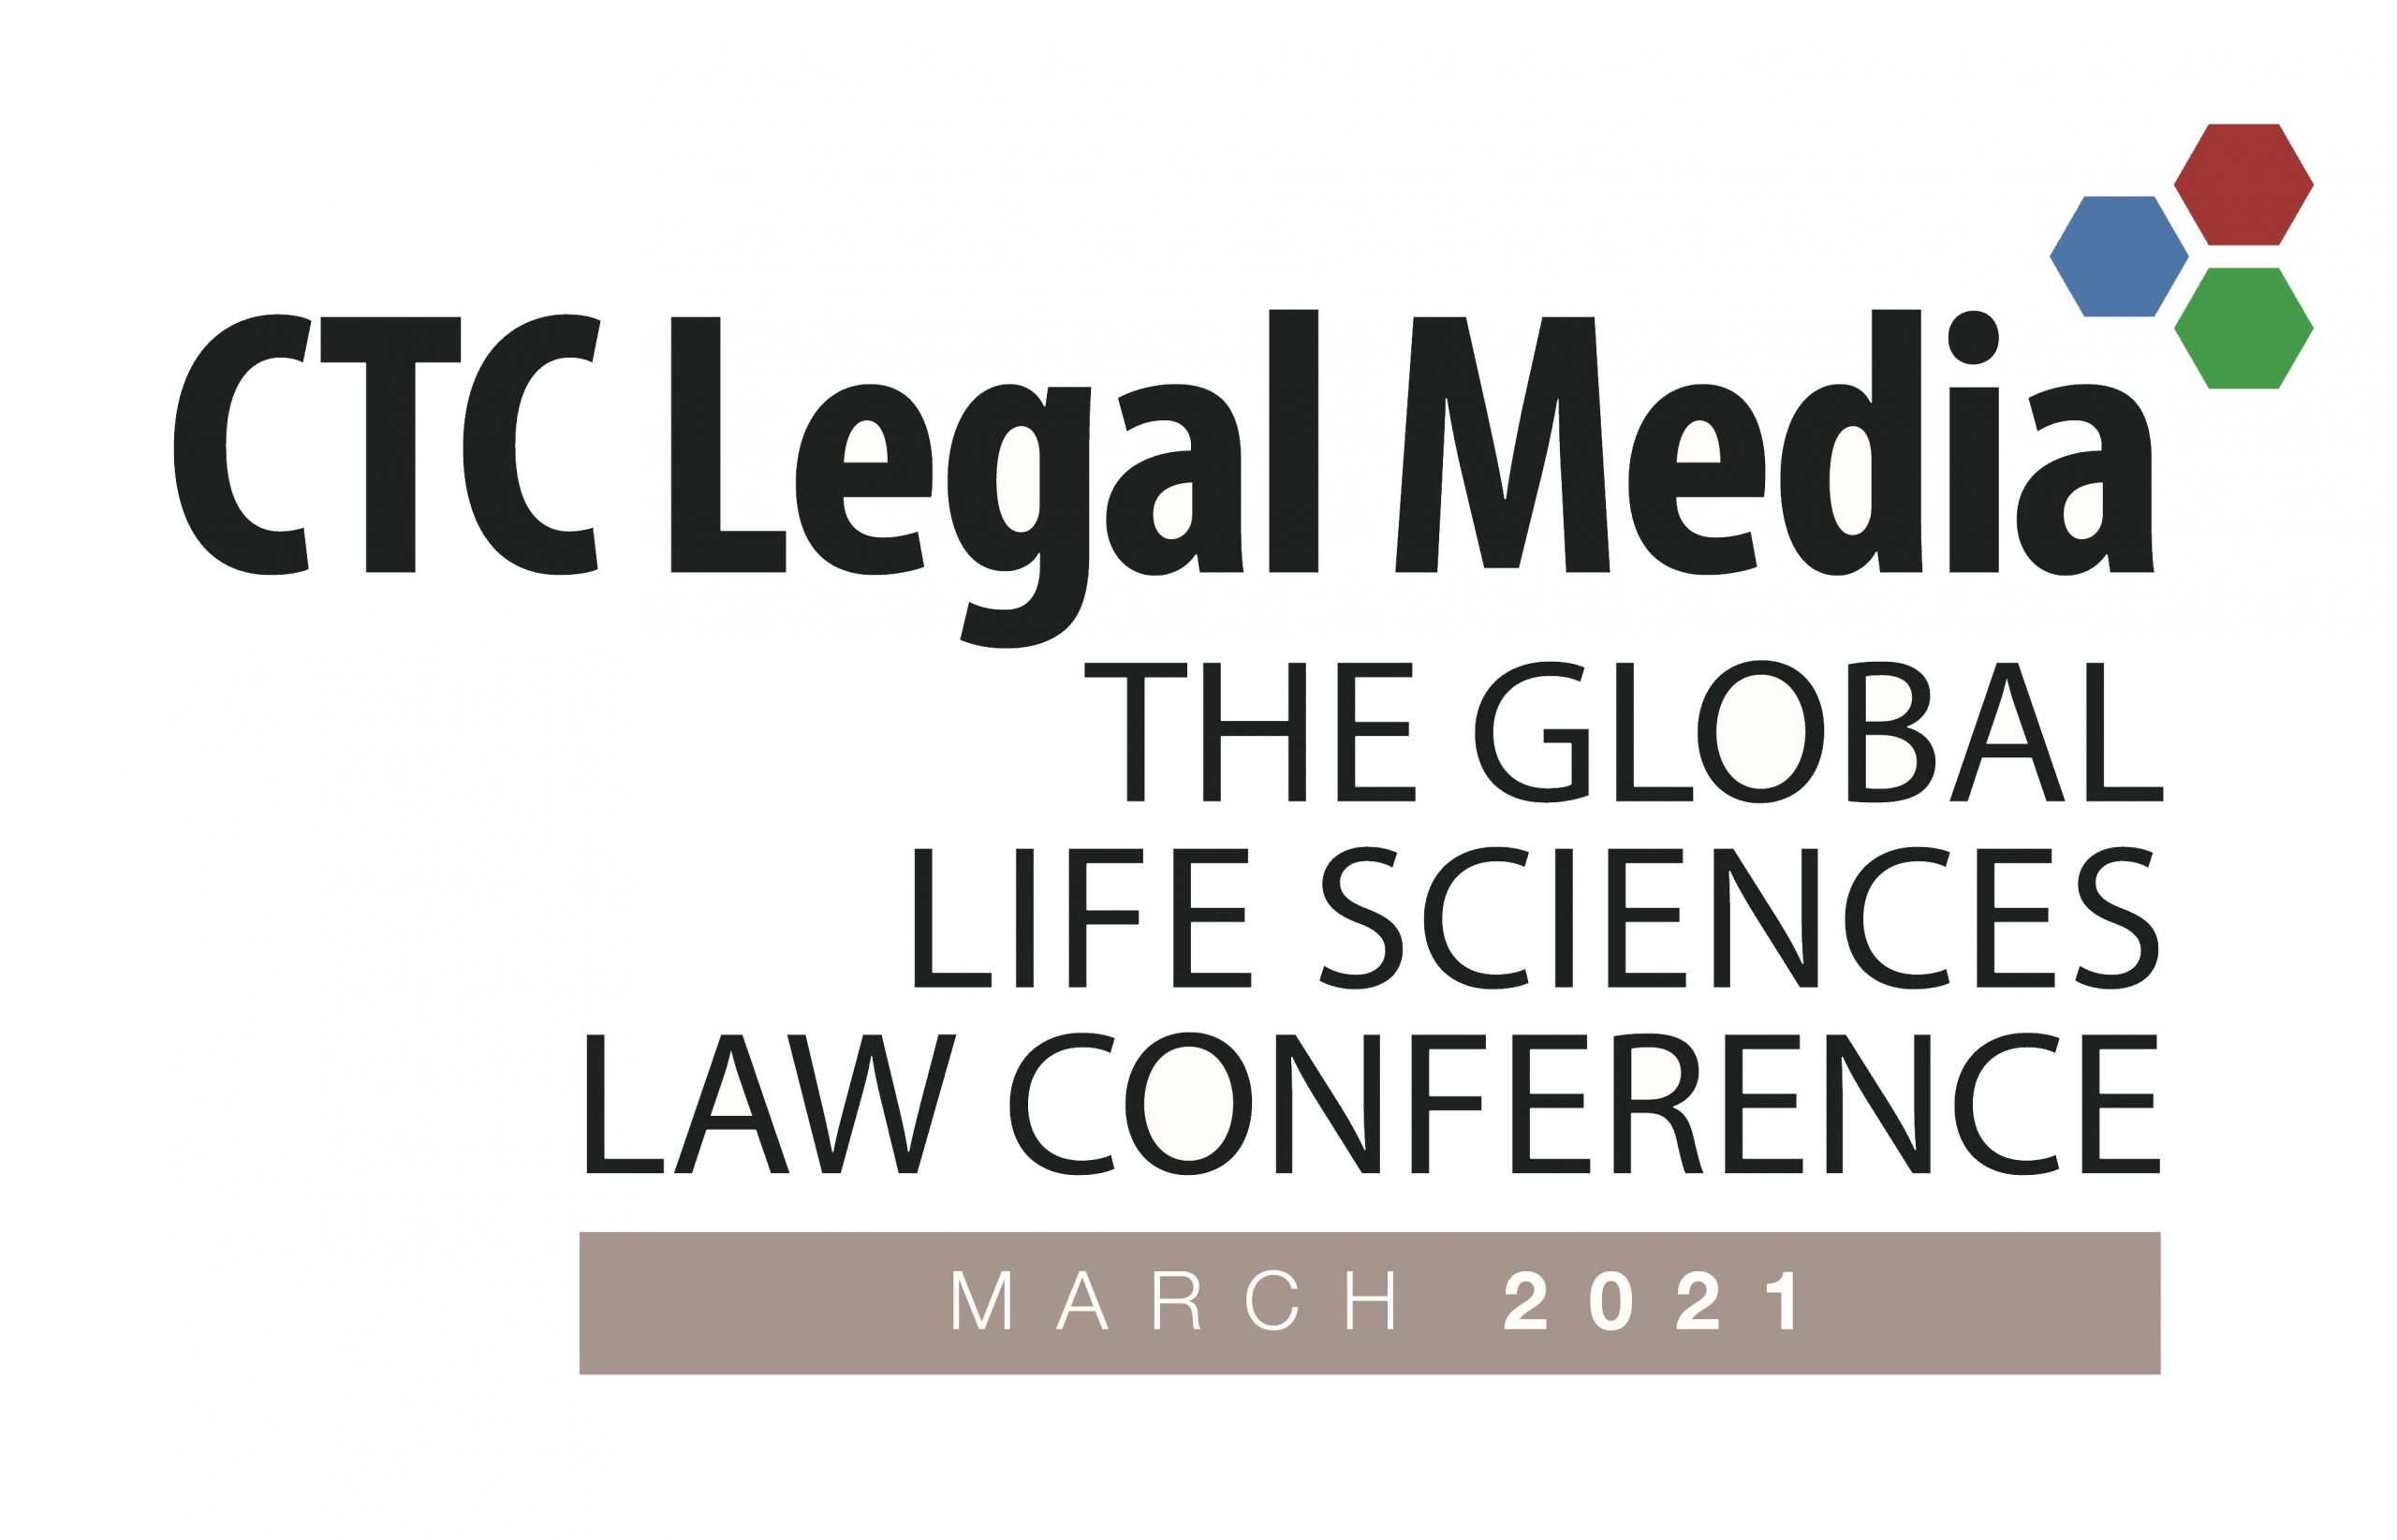 CTC Legal Media The Global Life Sciences Law Conference Patent